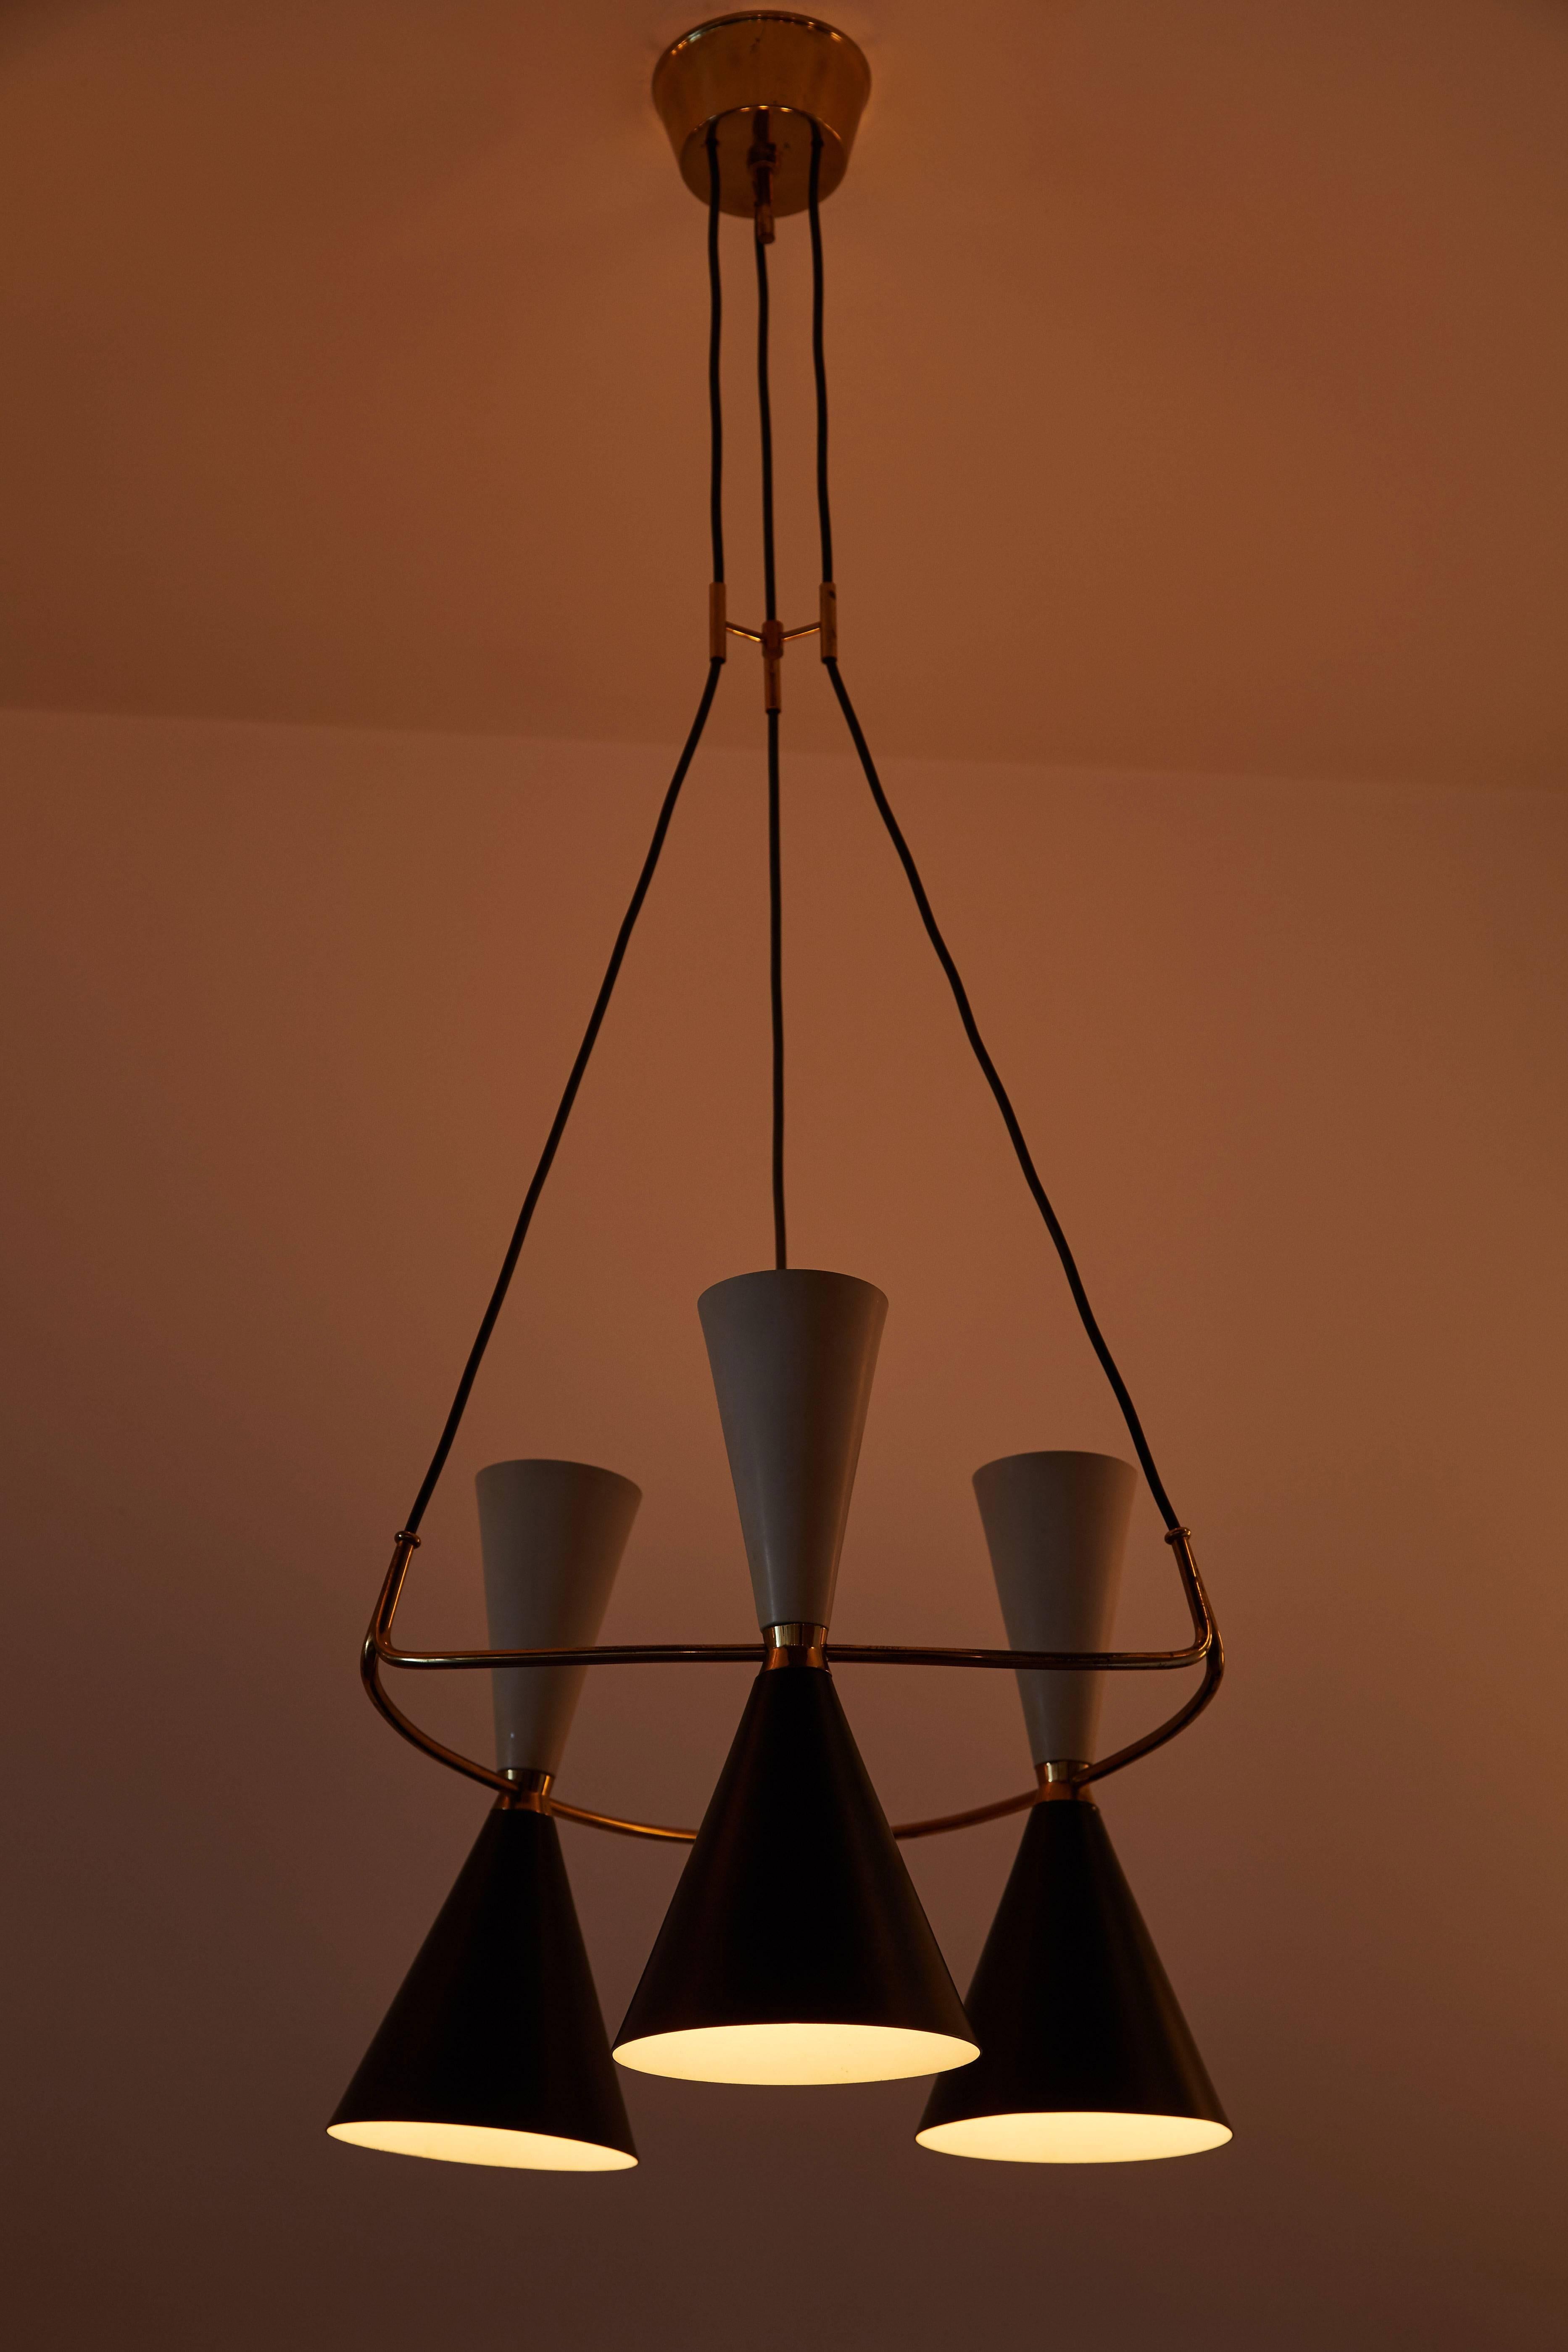 Rare suspension light in polished brass and painted diabolo shaped metal shades designed by Biancardi & Jordan in Italy, circa 1950s. Wired for US junction boxes. Takes three E27 75W maximum bulbs.
 